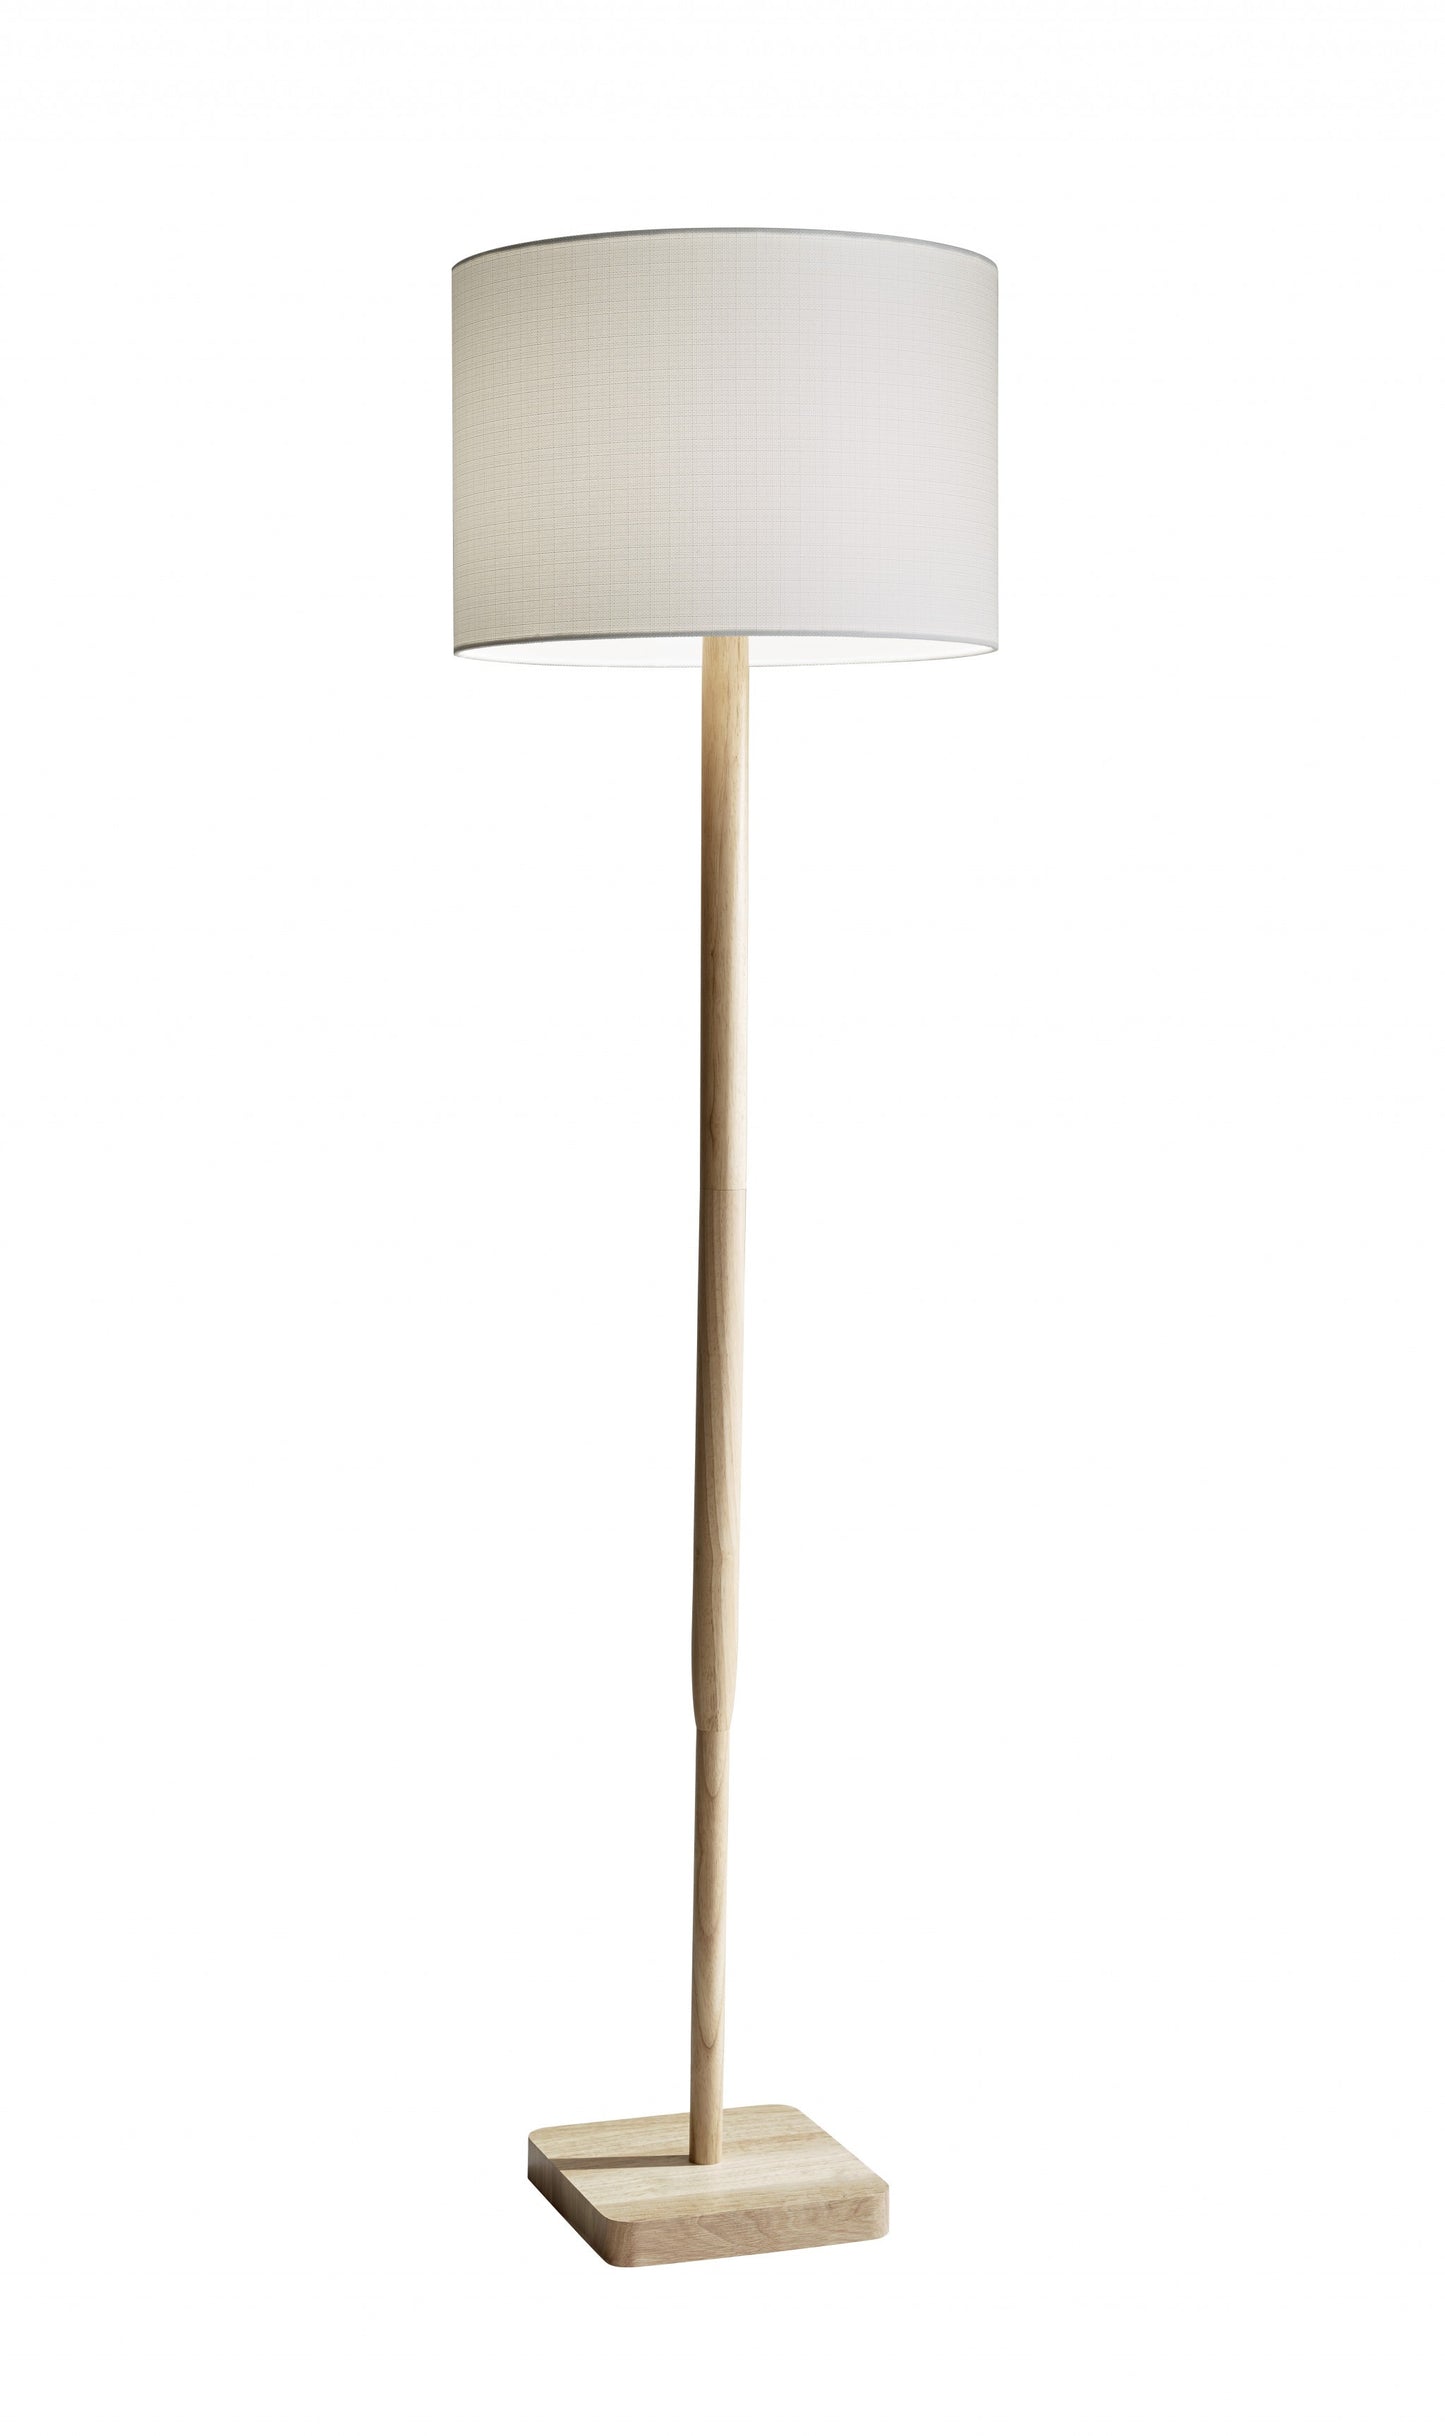 59" Solid Wood Traditional Shaped Floor Lamp With Black Drum Shade